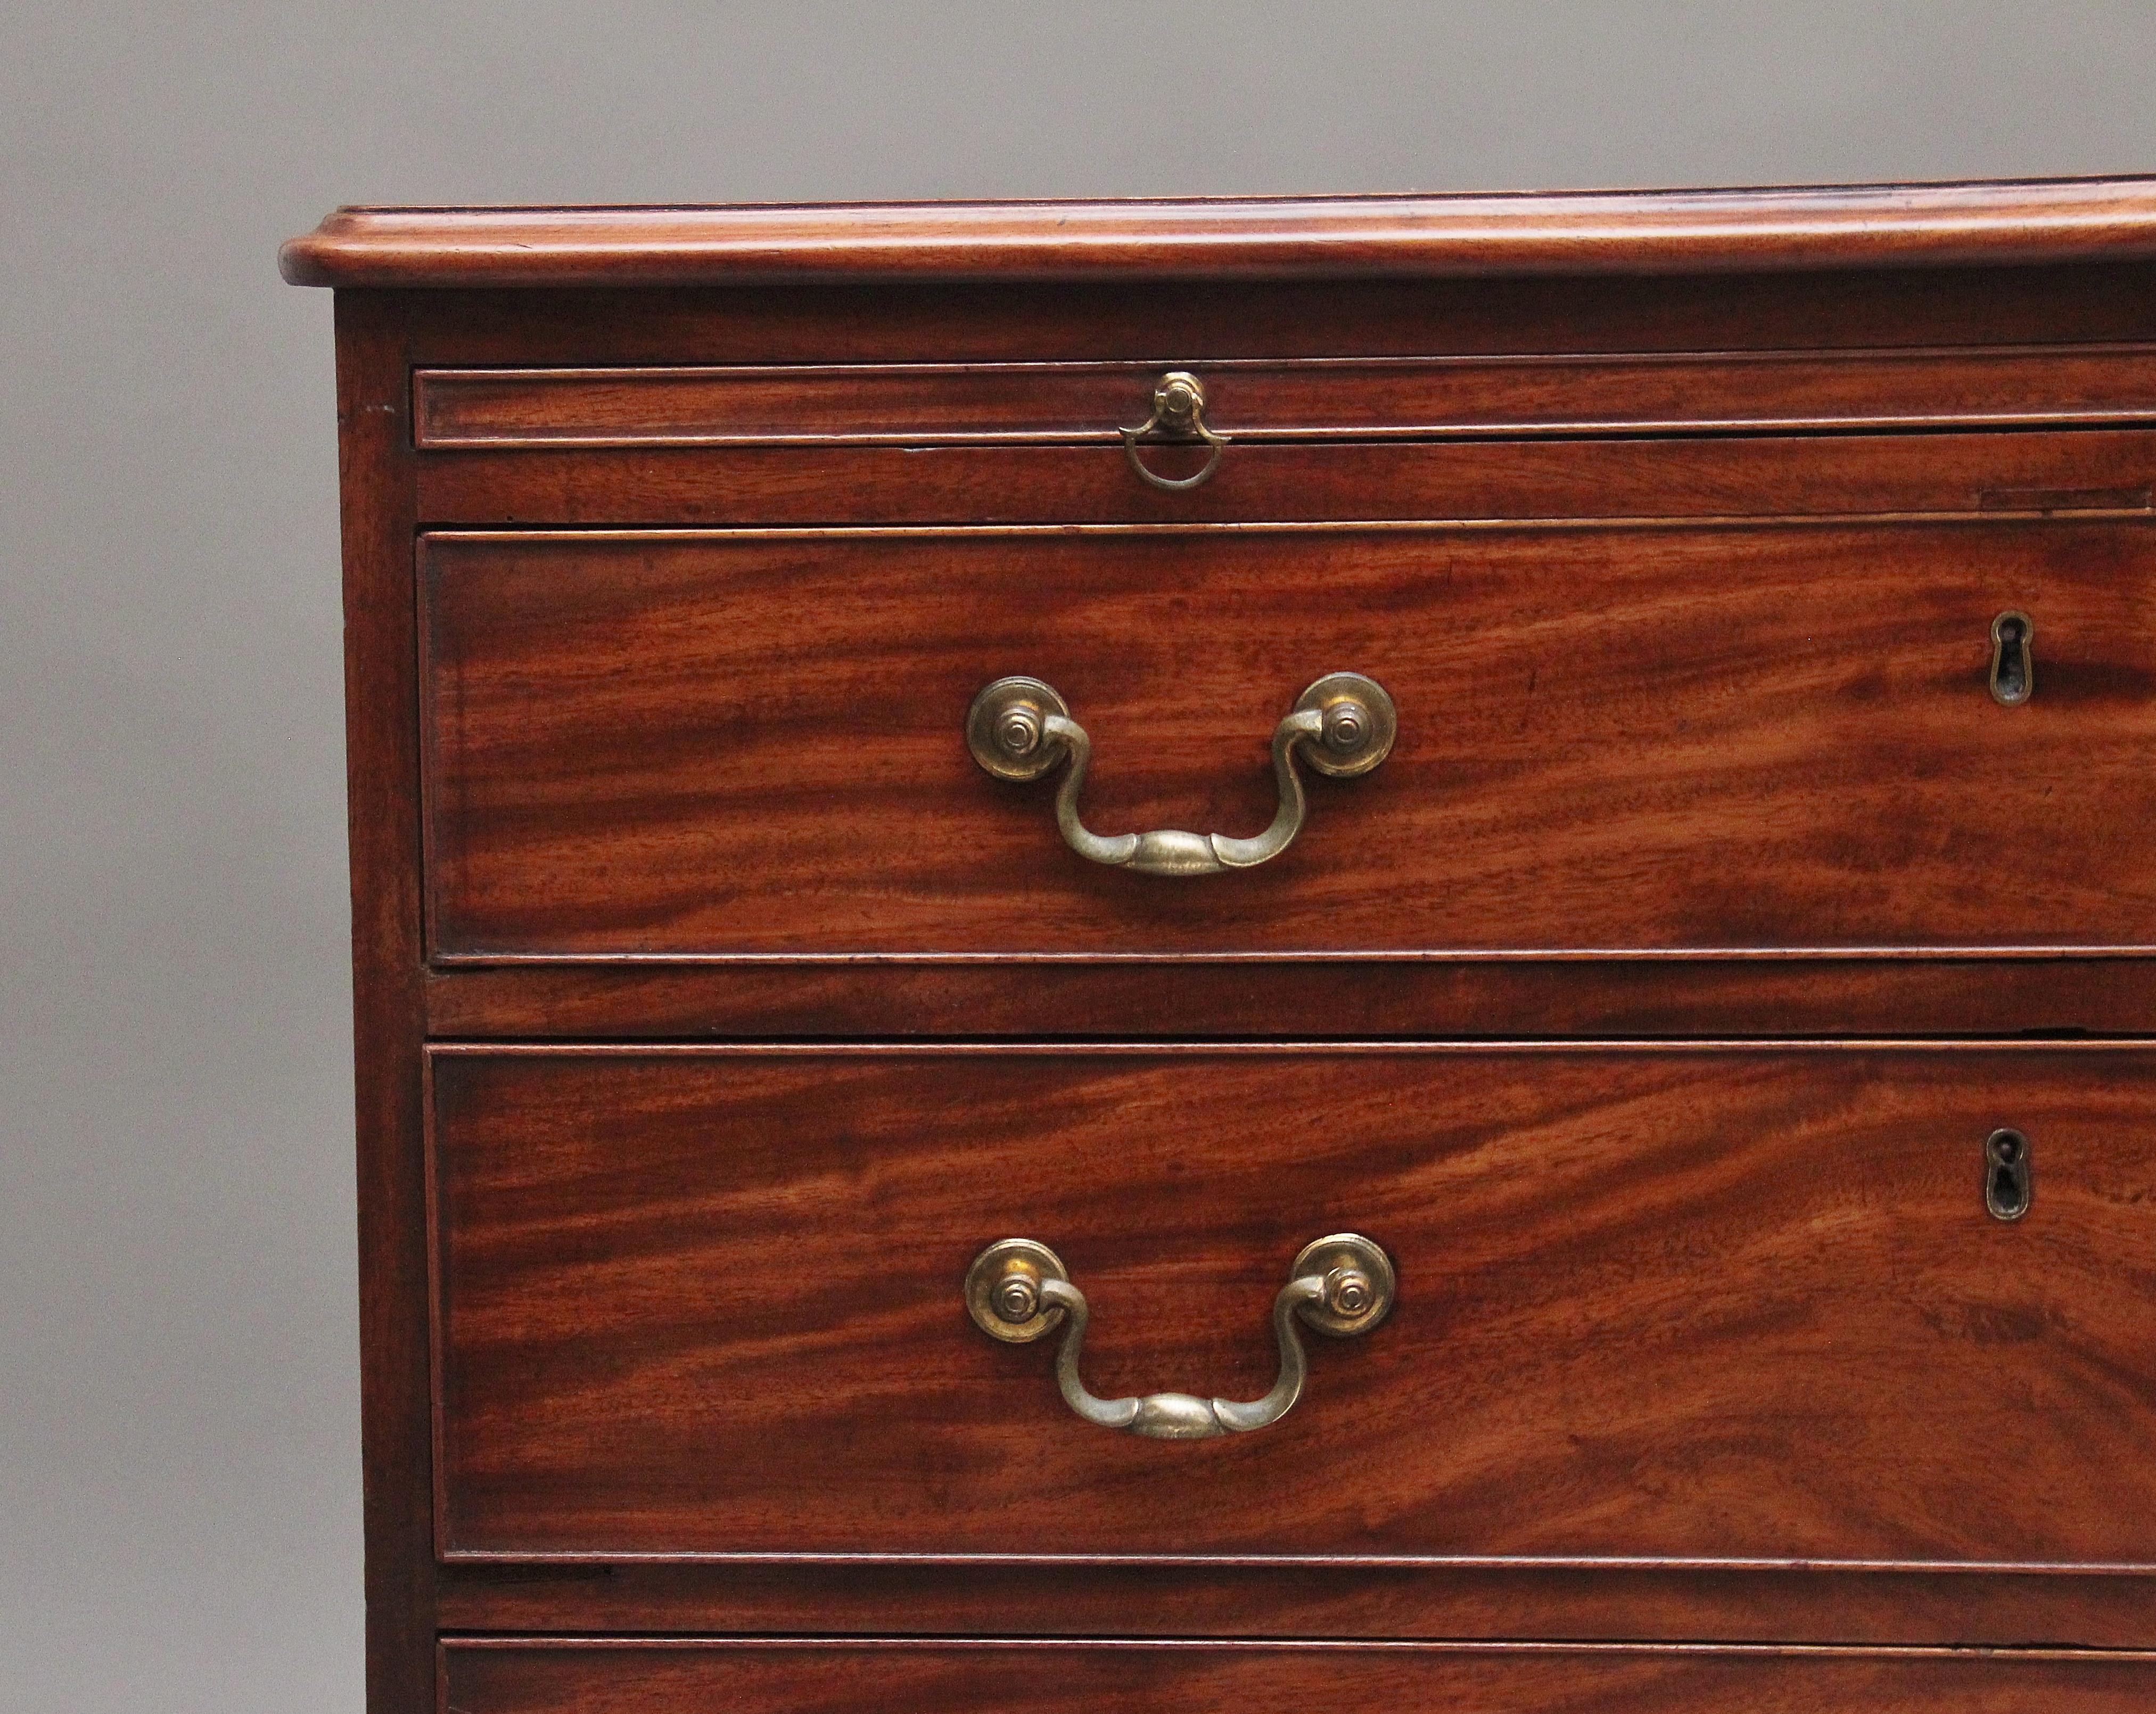 A superb quality 18th Century mahogany chest of drawers, having a nice figured top with a moulded edge above a brushing slide, four oak lined graduated drawers below with the original brass swan neck handles, lovely figuration on the drawer fronts